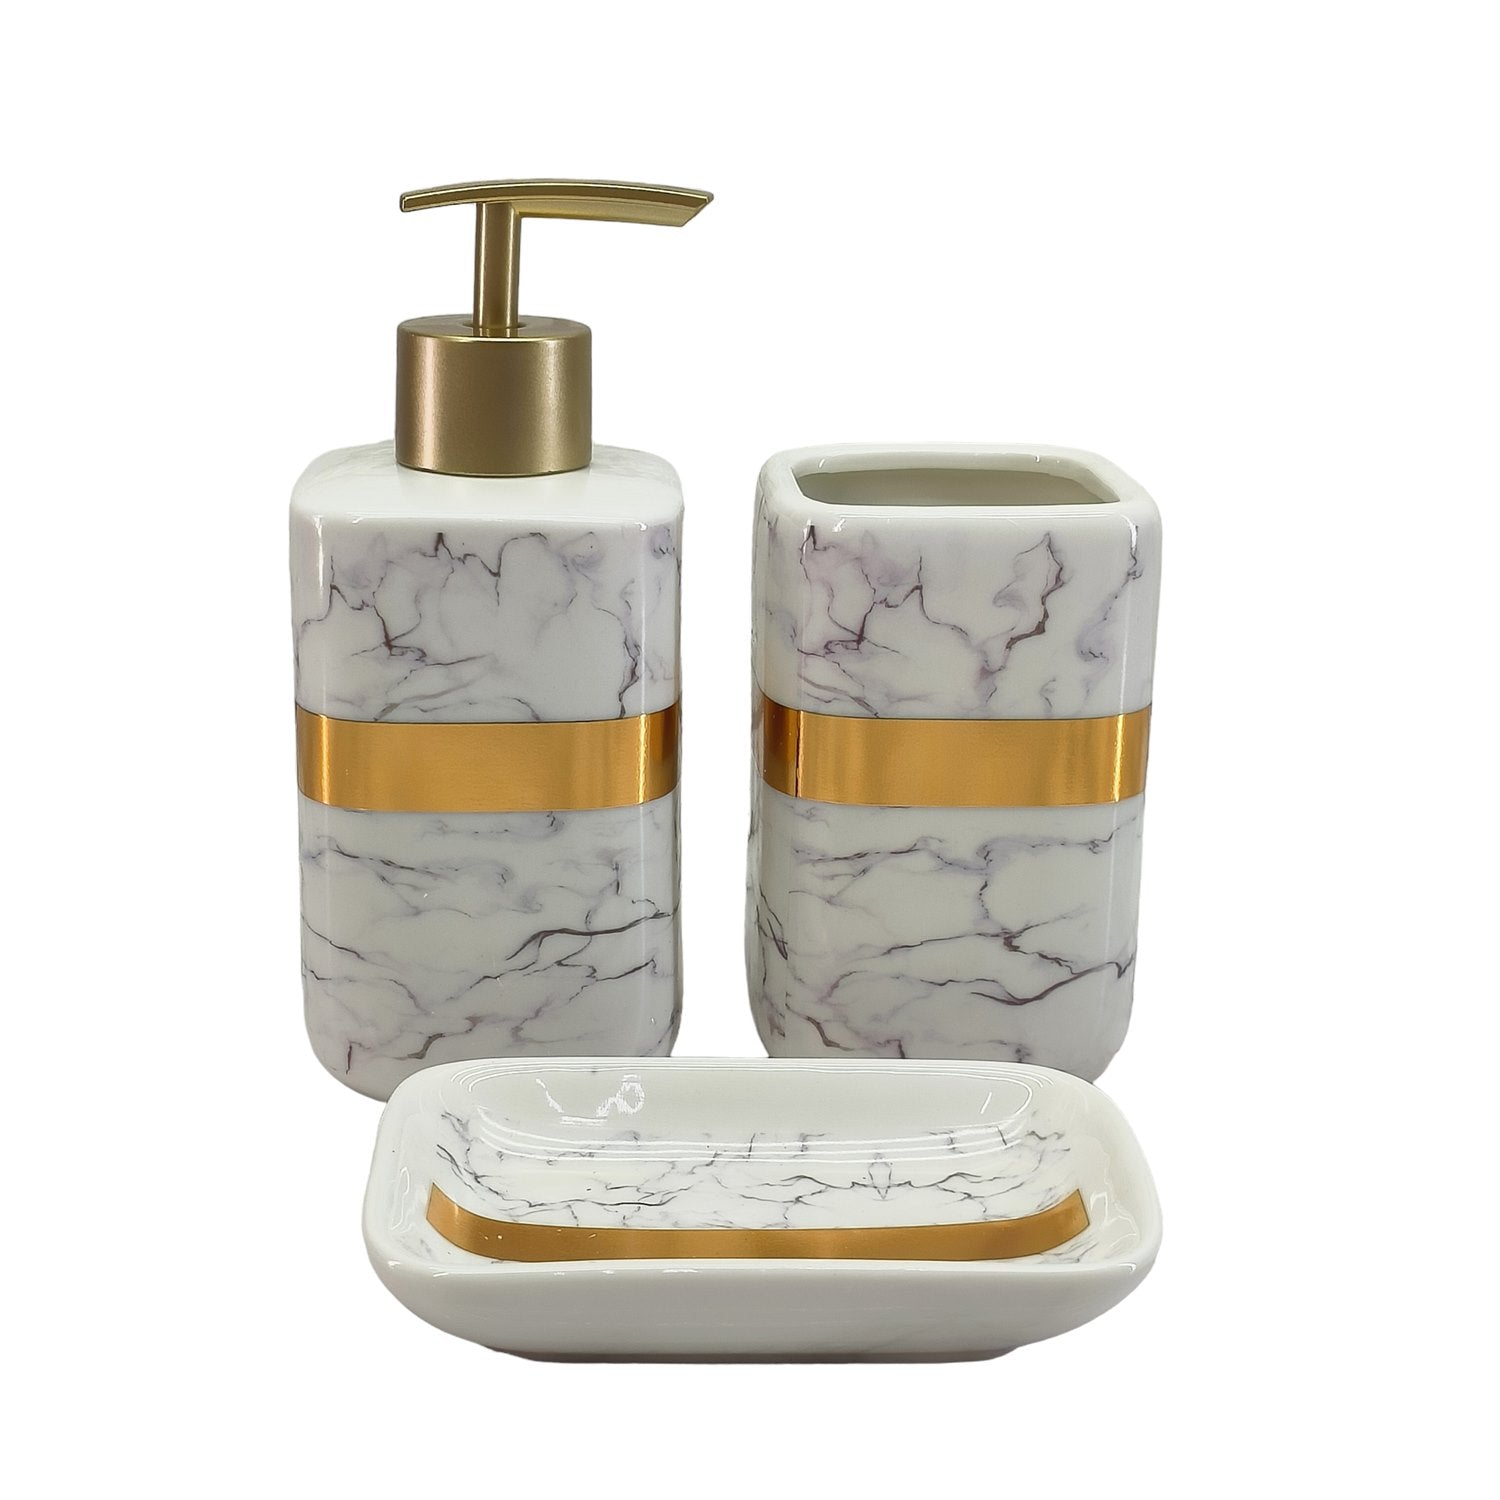 Ceramic Soap Dispenser Set with Toothbrush Holder and Soap Dish, Set of 3 Bathroom Accessories for Home (C3034)